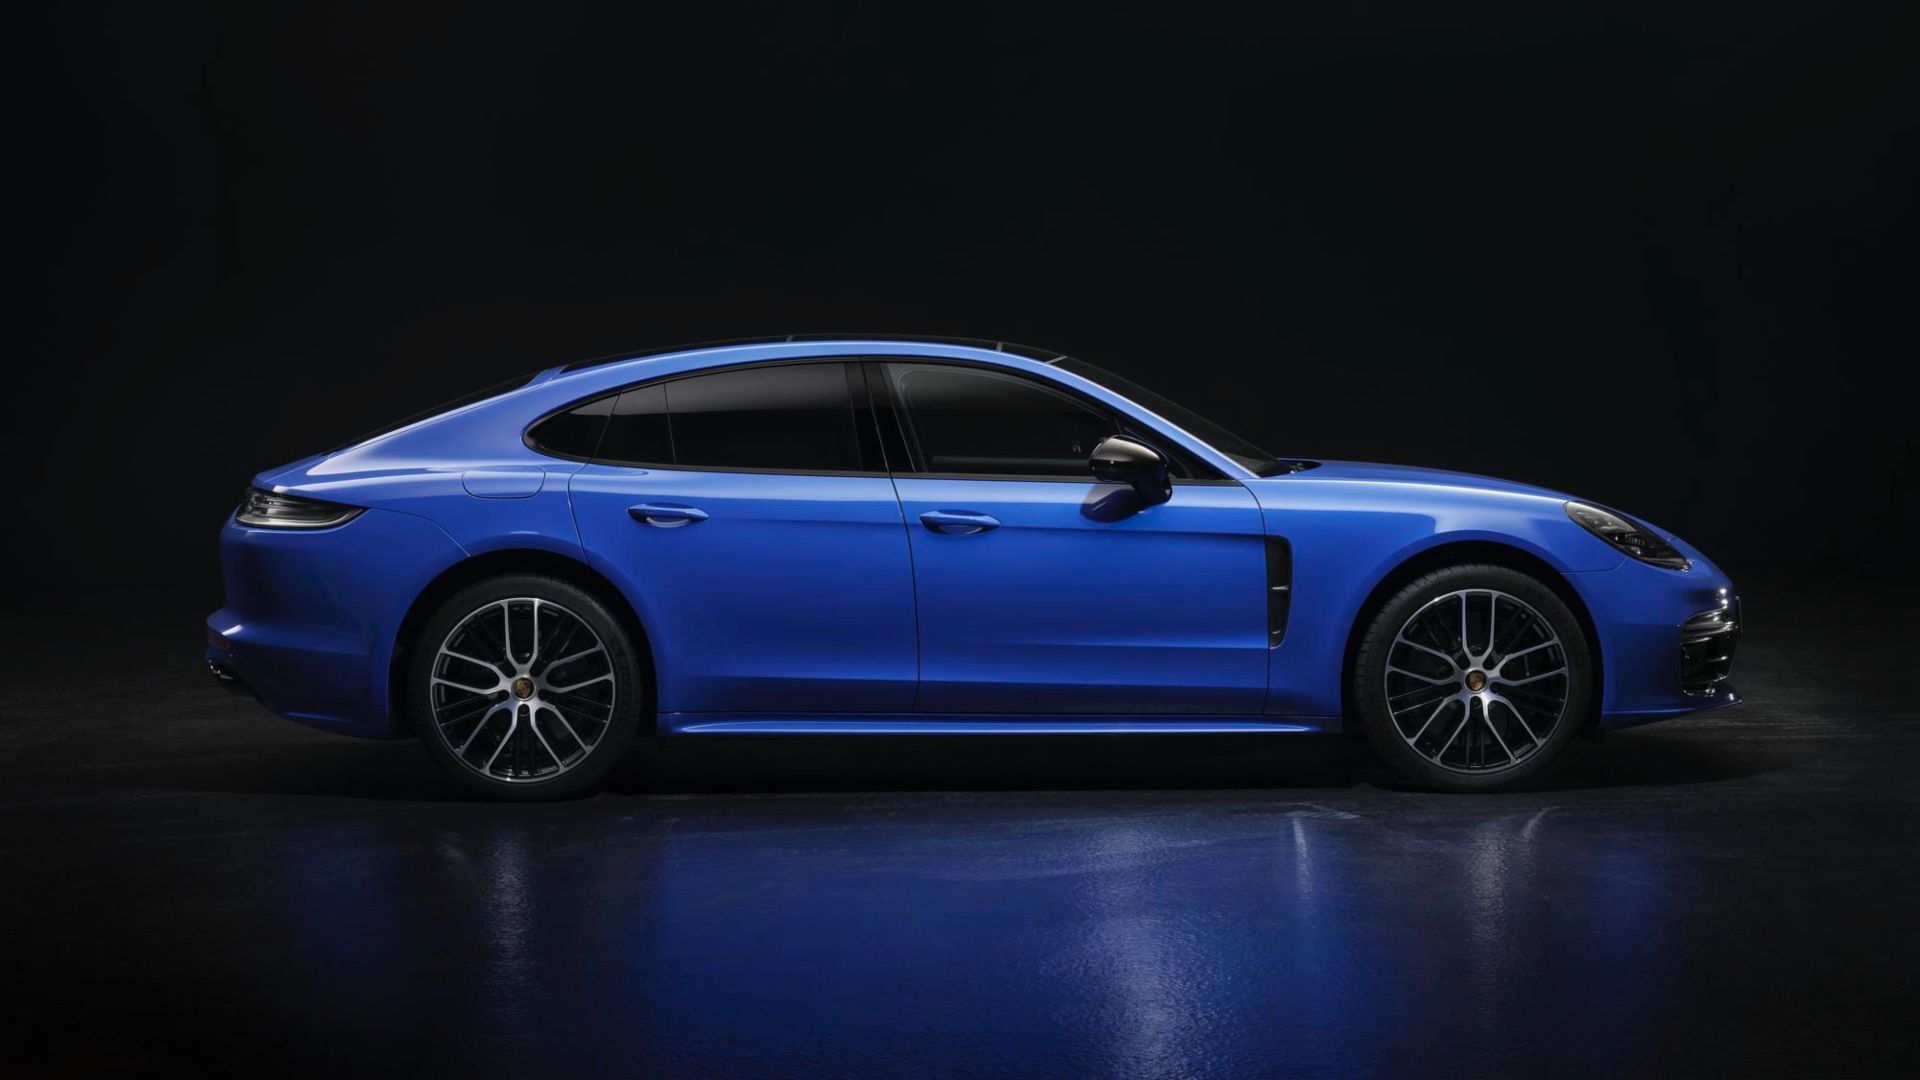 Porsche Panamera Turbo S in Maritime Blue from Paint to Sample program